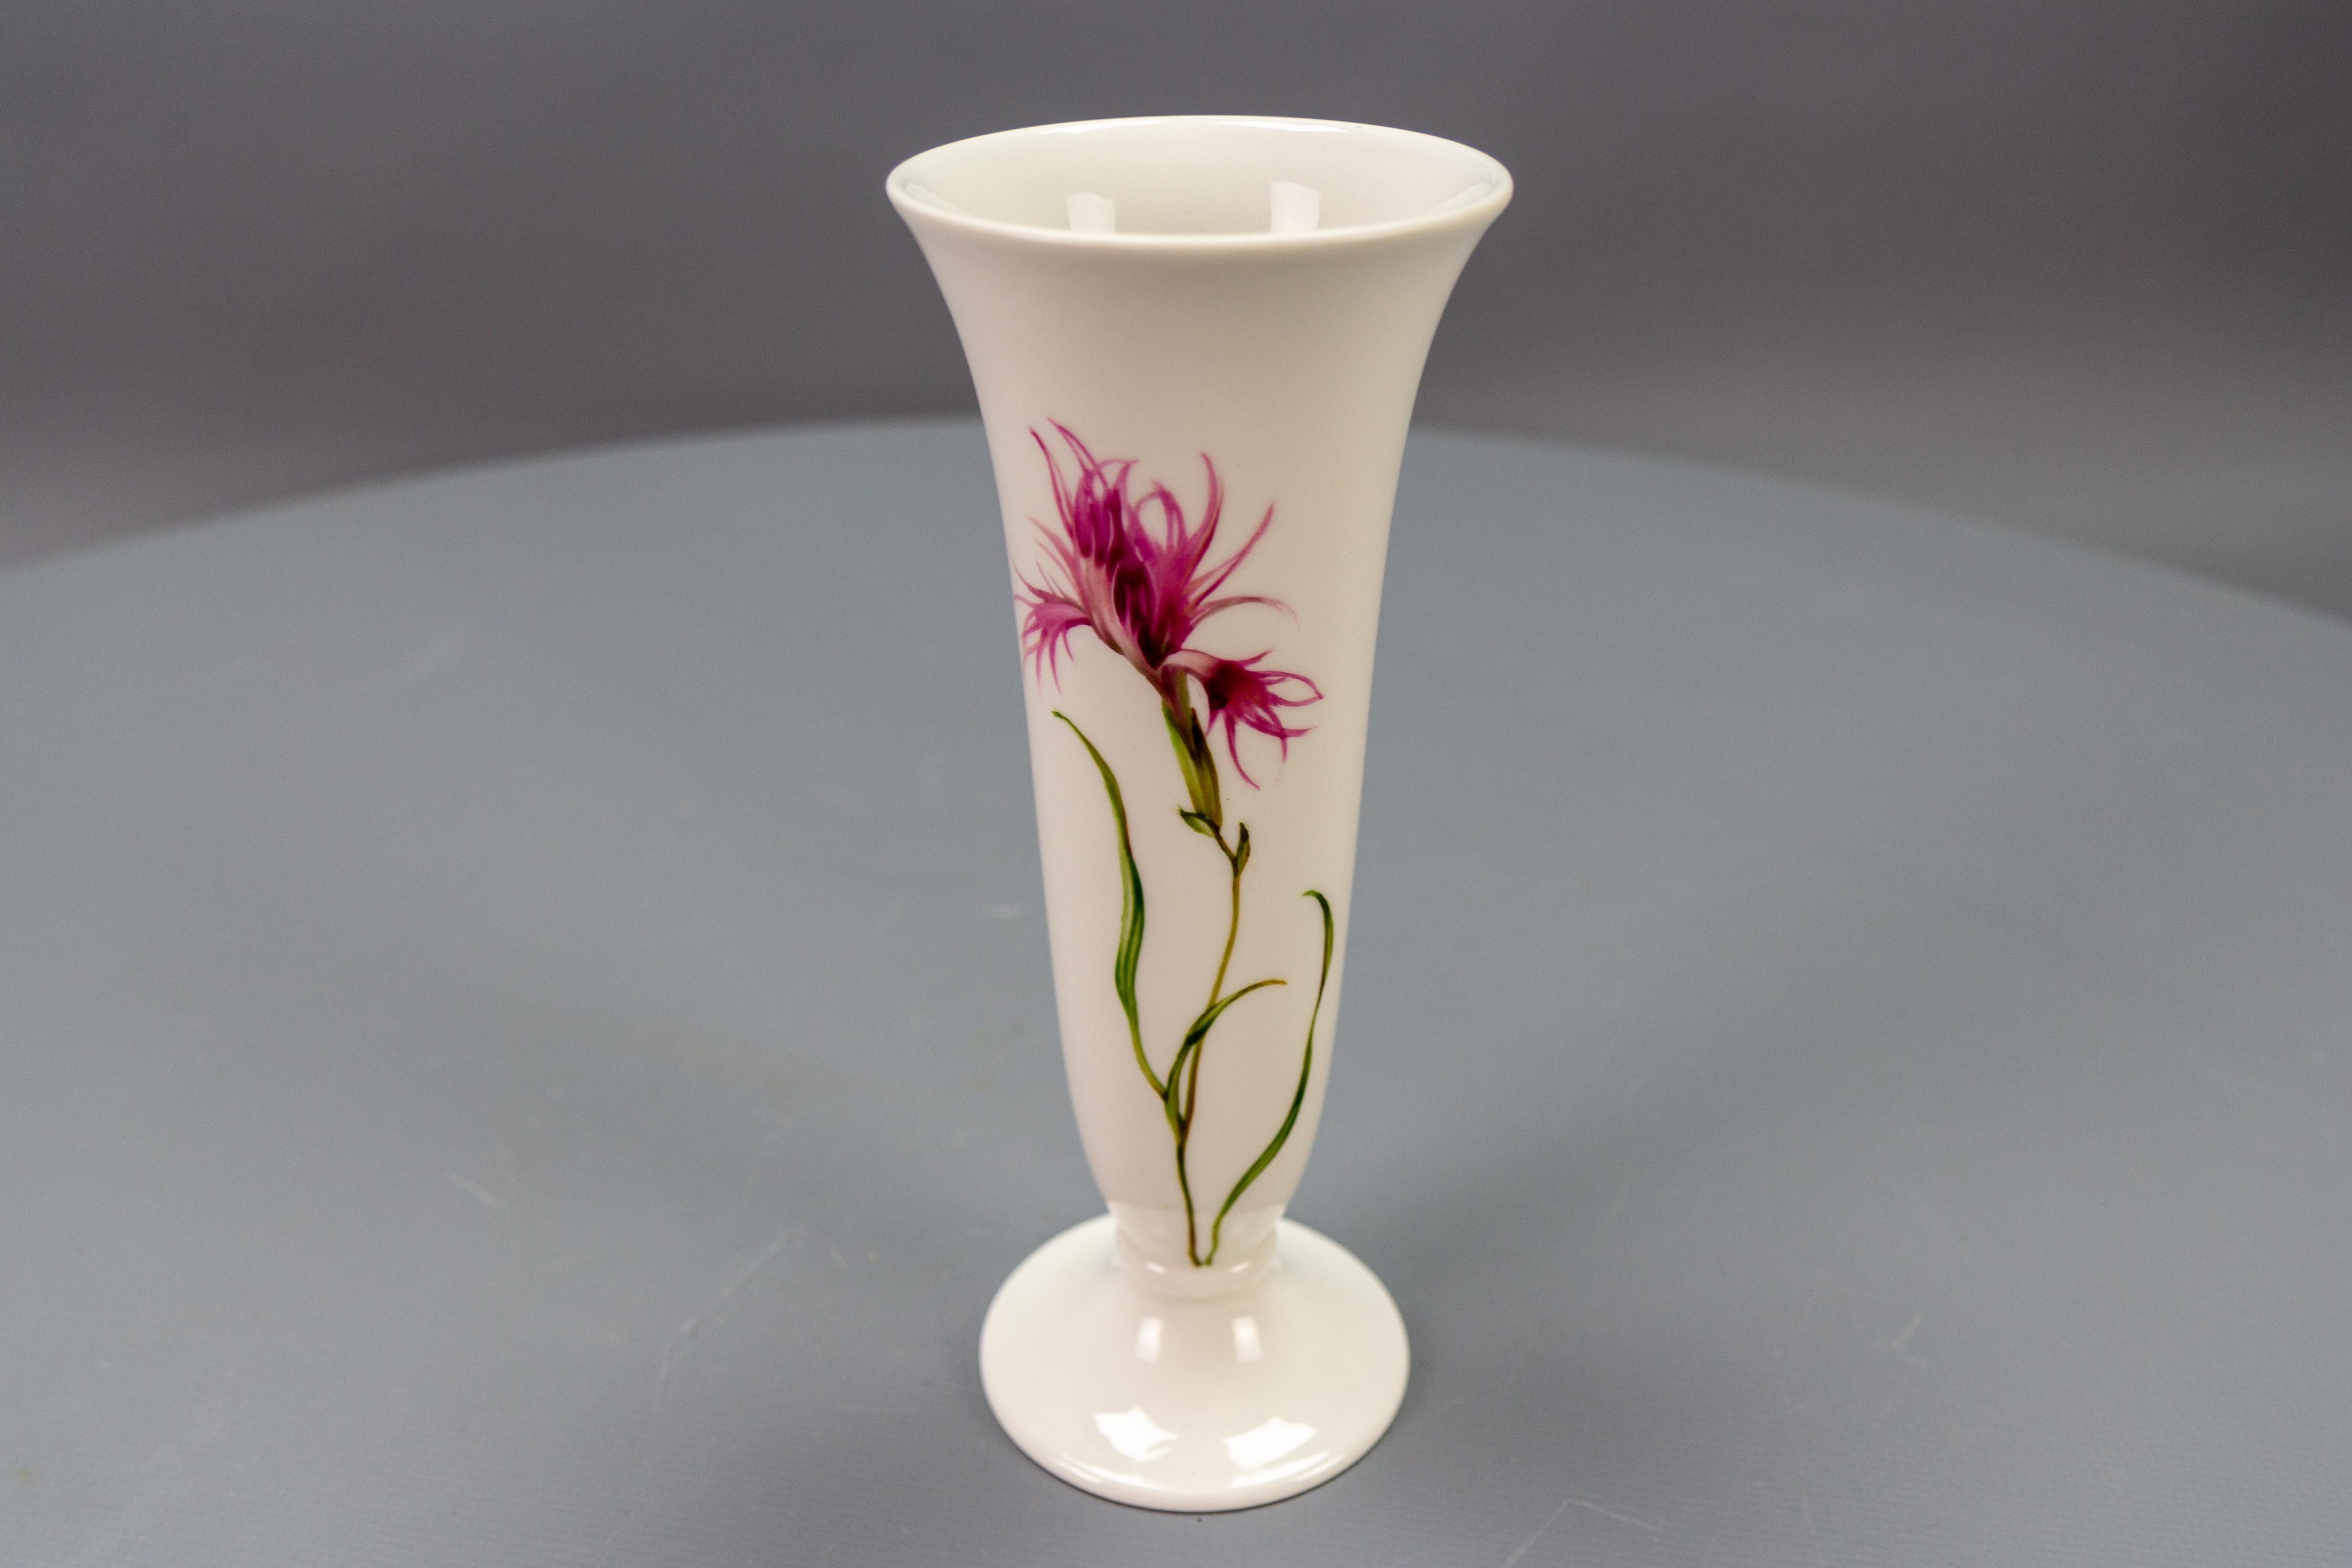 German White Porcelain Vase Pink Feather Carnation Flower by Hutschenreuther For Sale 4